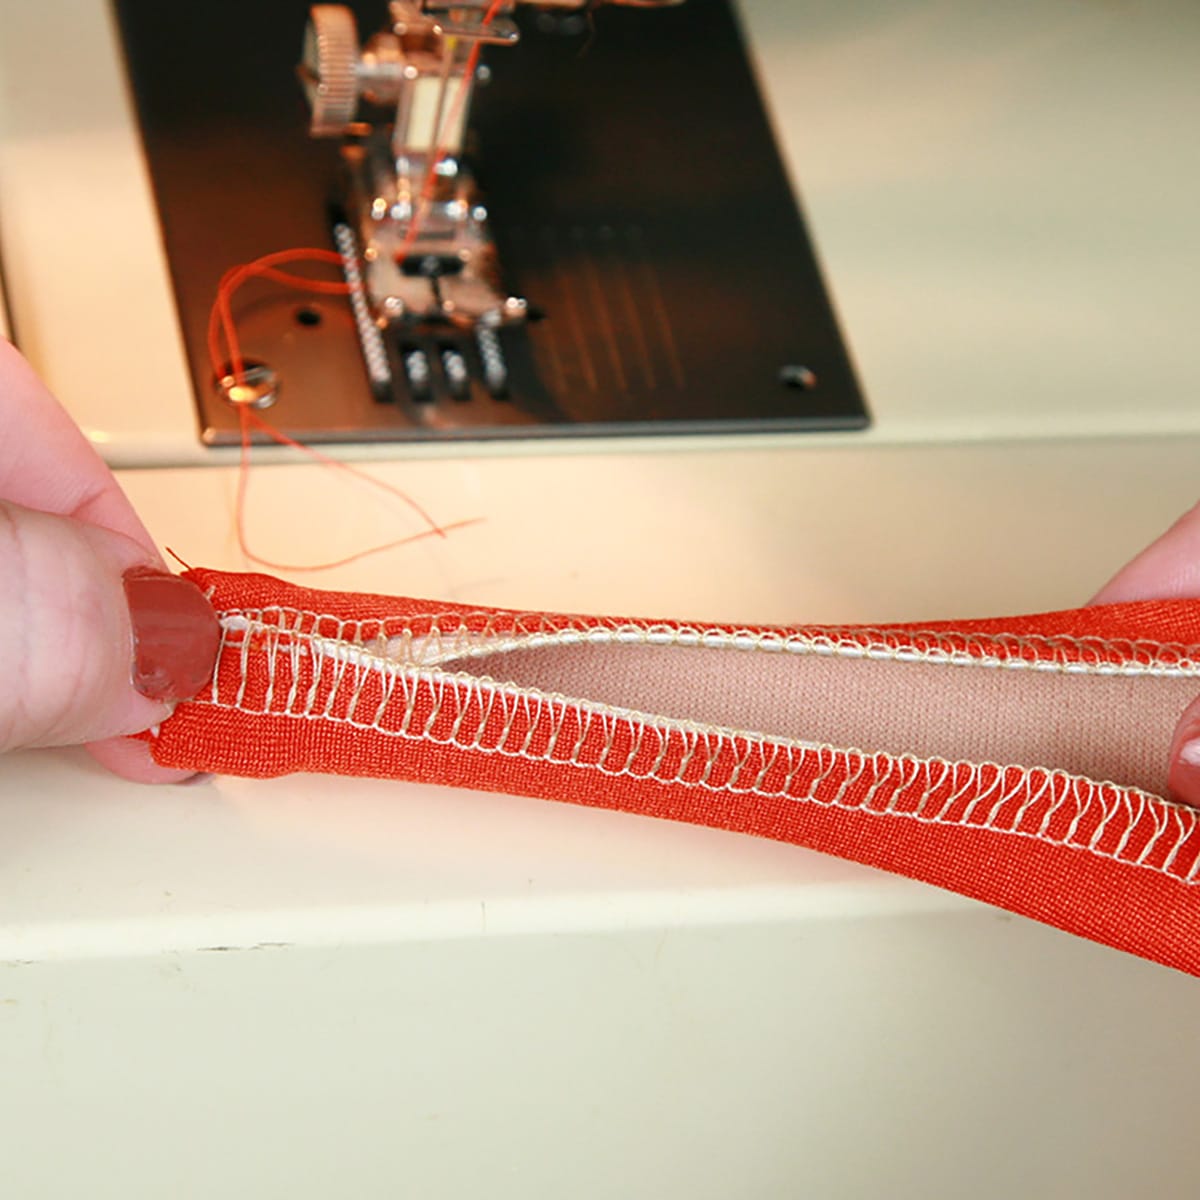 Elastic being applied to either side of a strap, as described in the post.